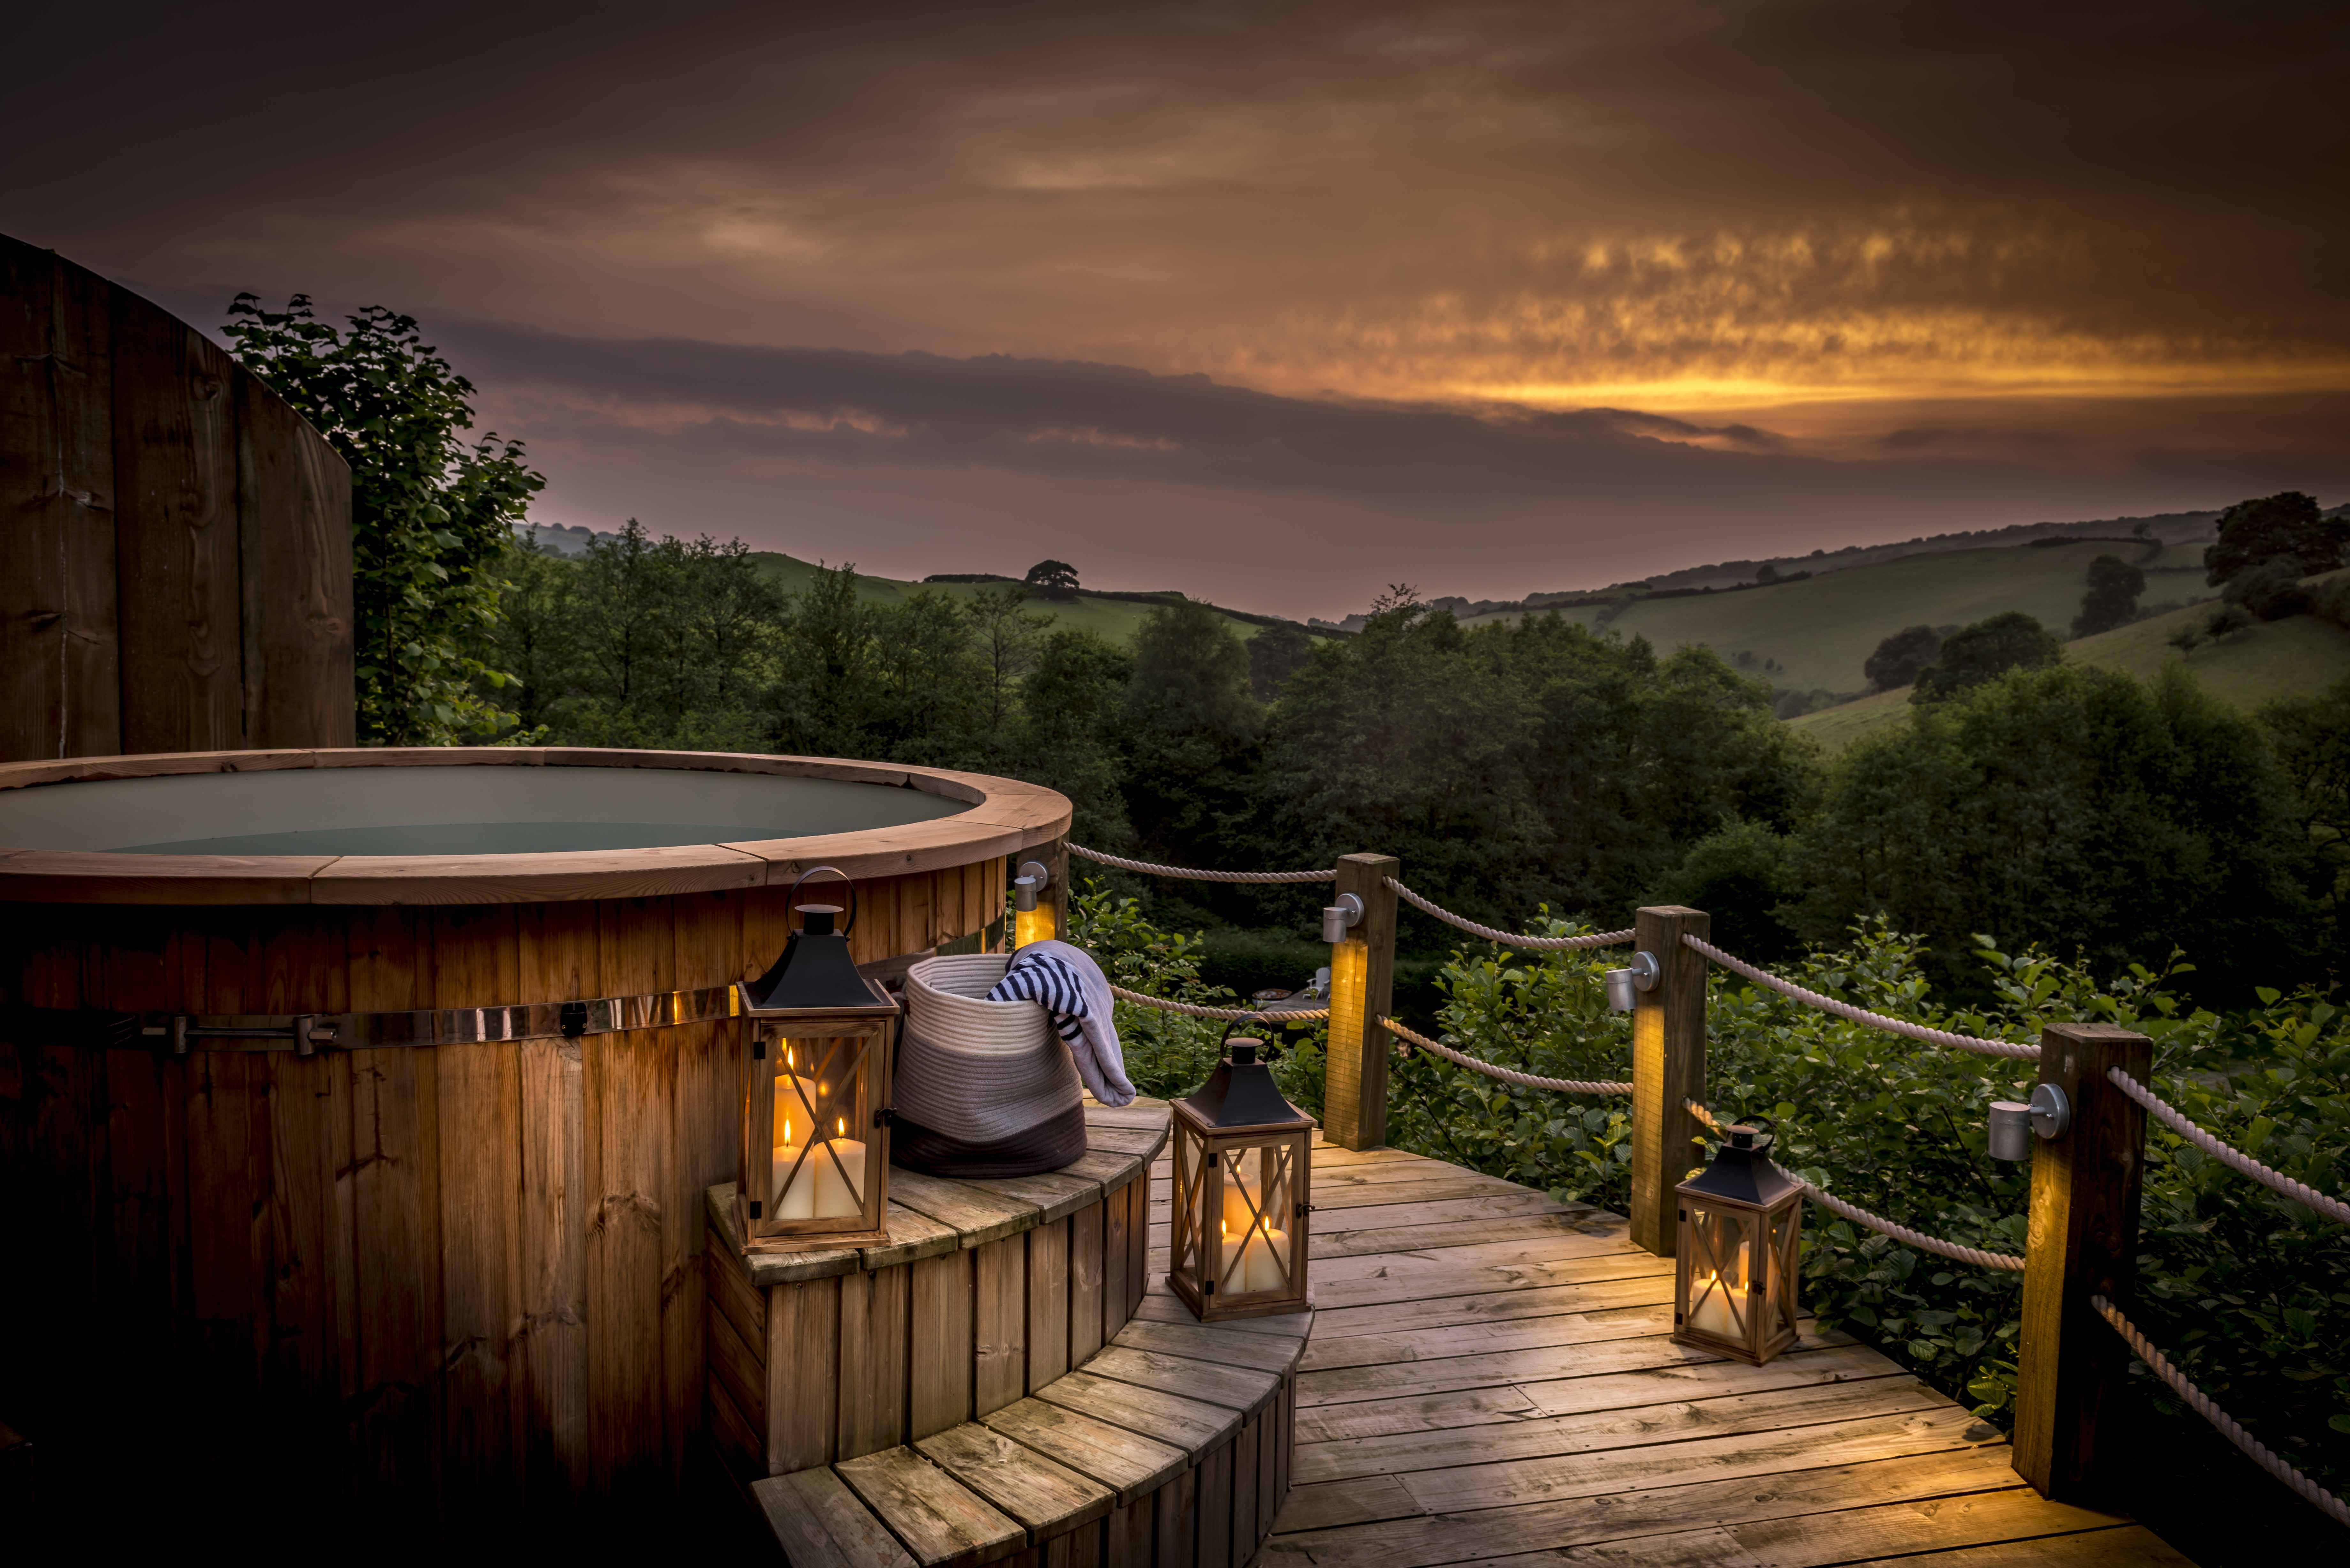 Watch the setting sun from the Longlands hot tub. Luxury glamping amongst gorgeous south west countryside.